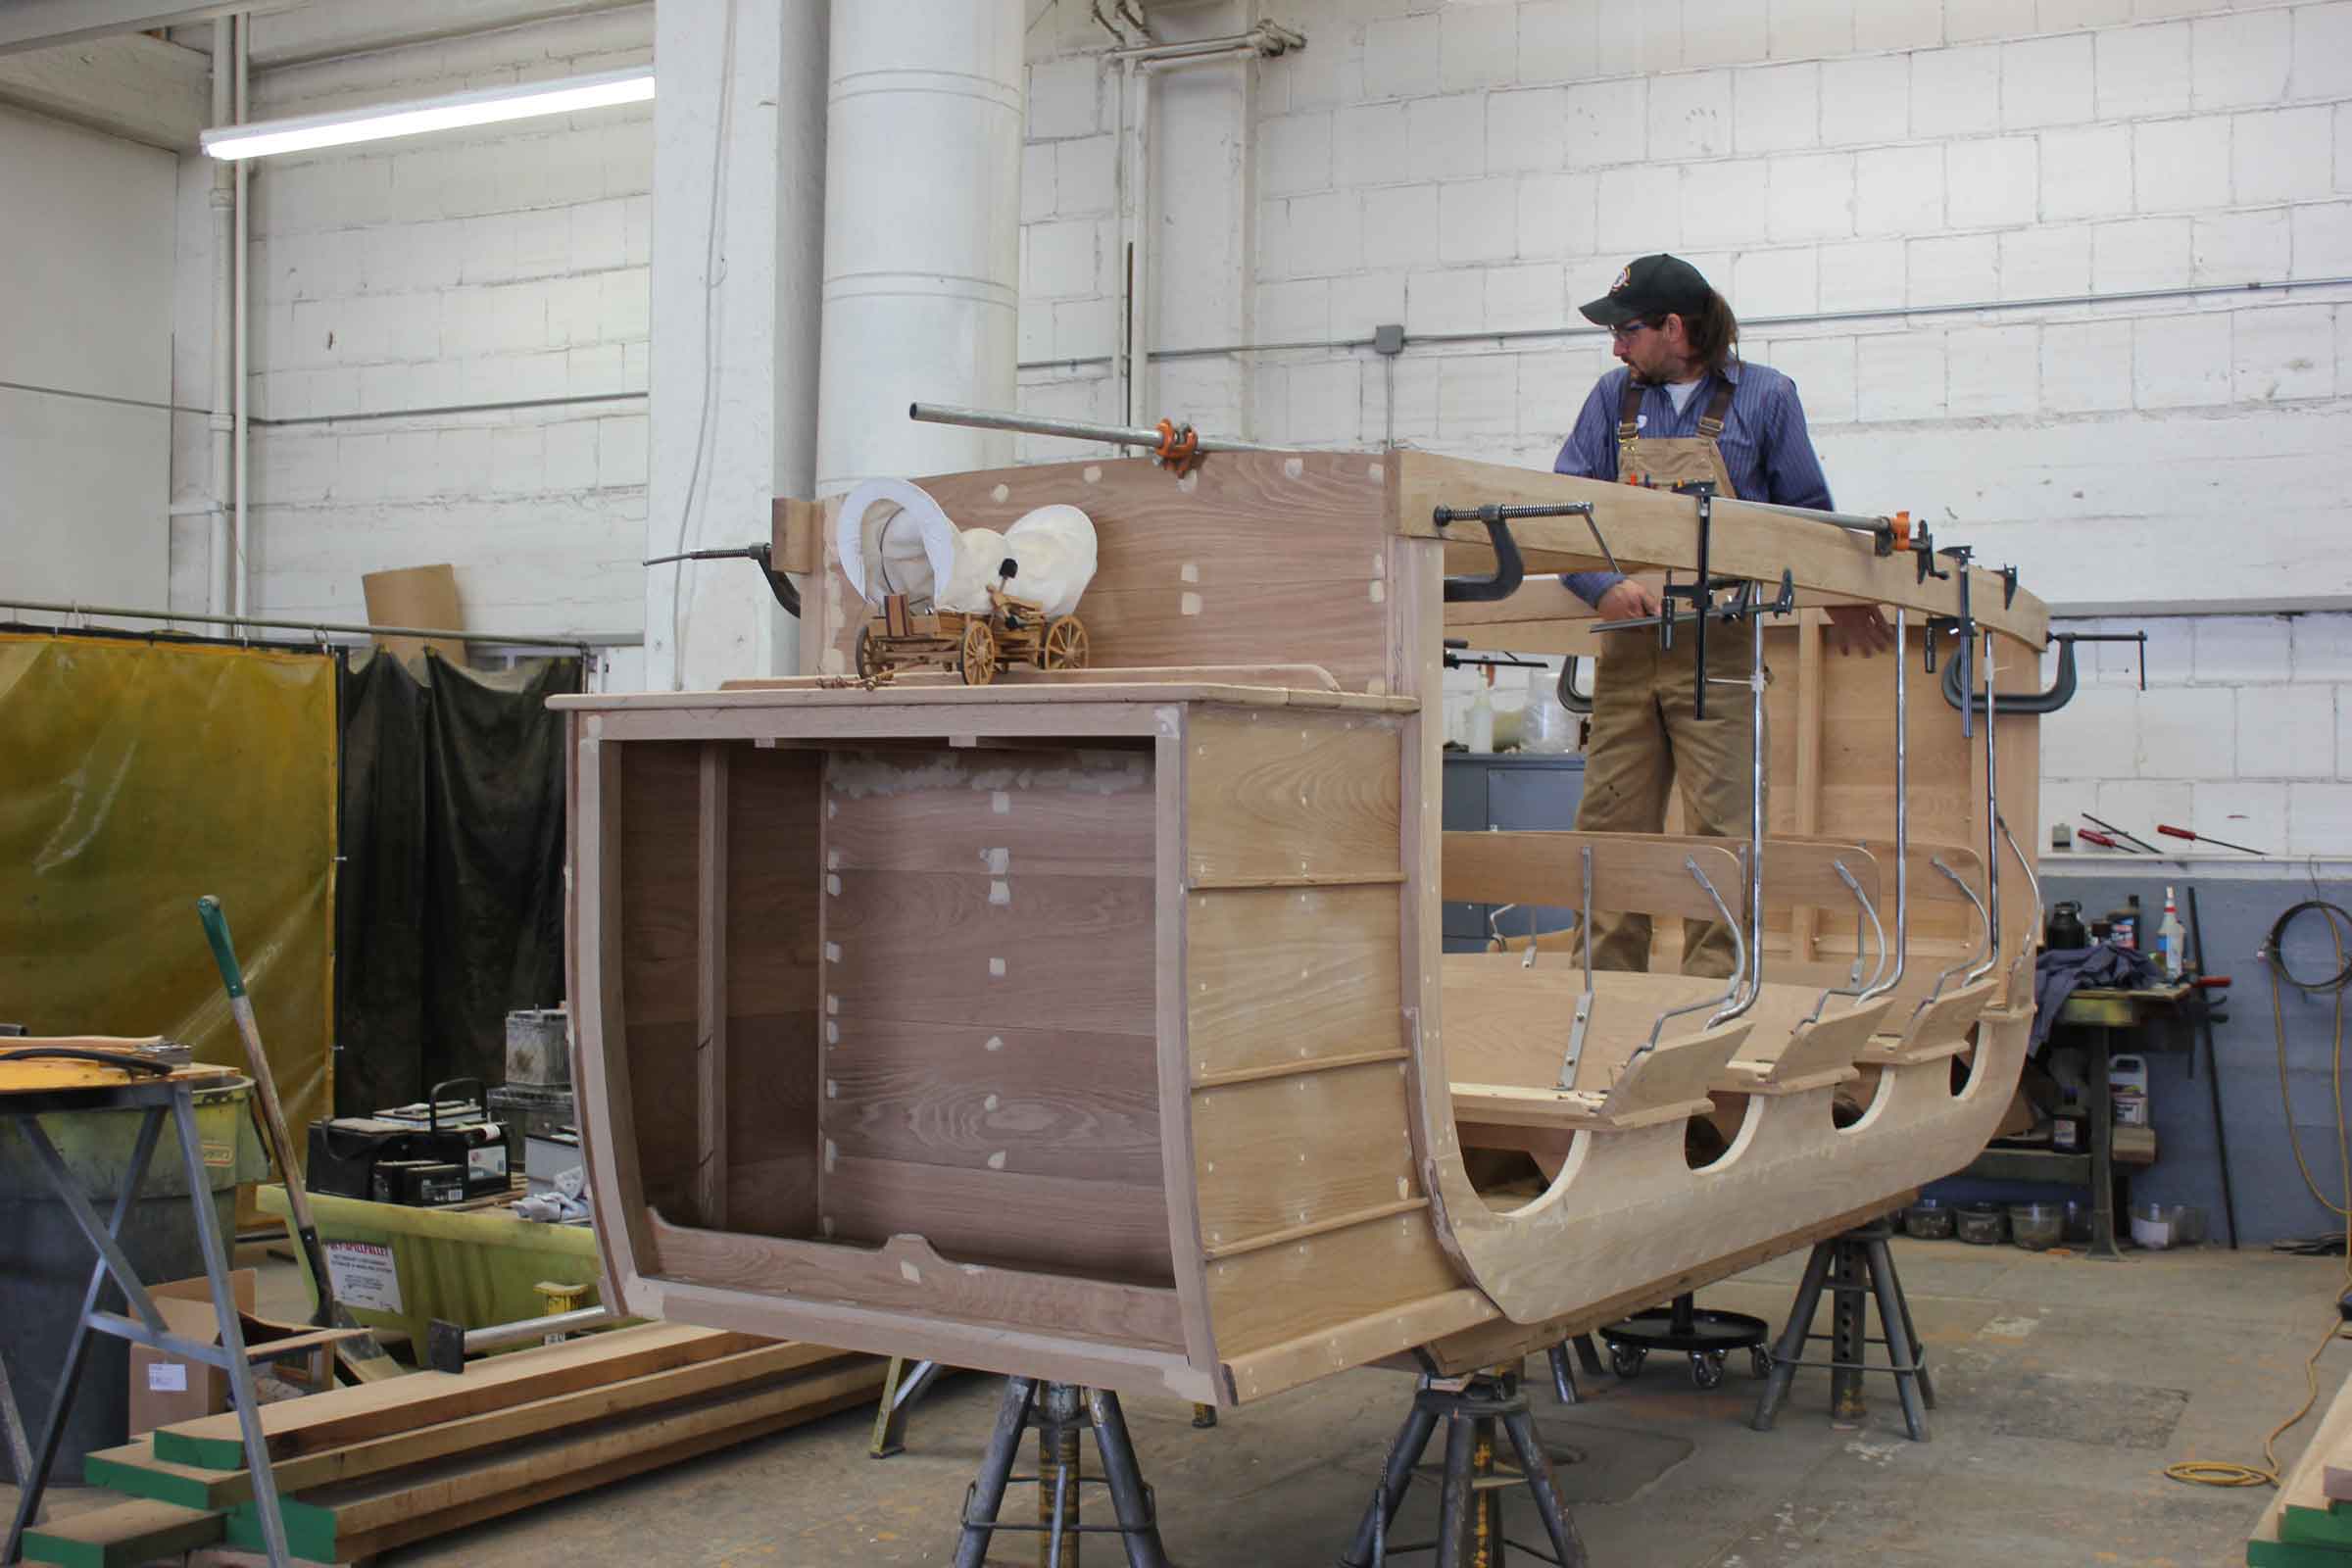 Stagecoach being built